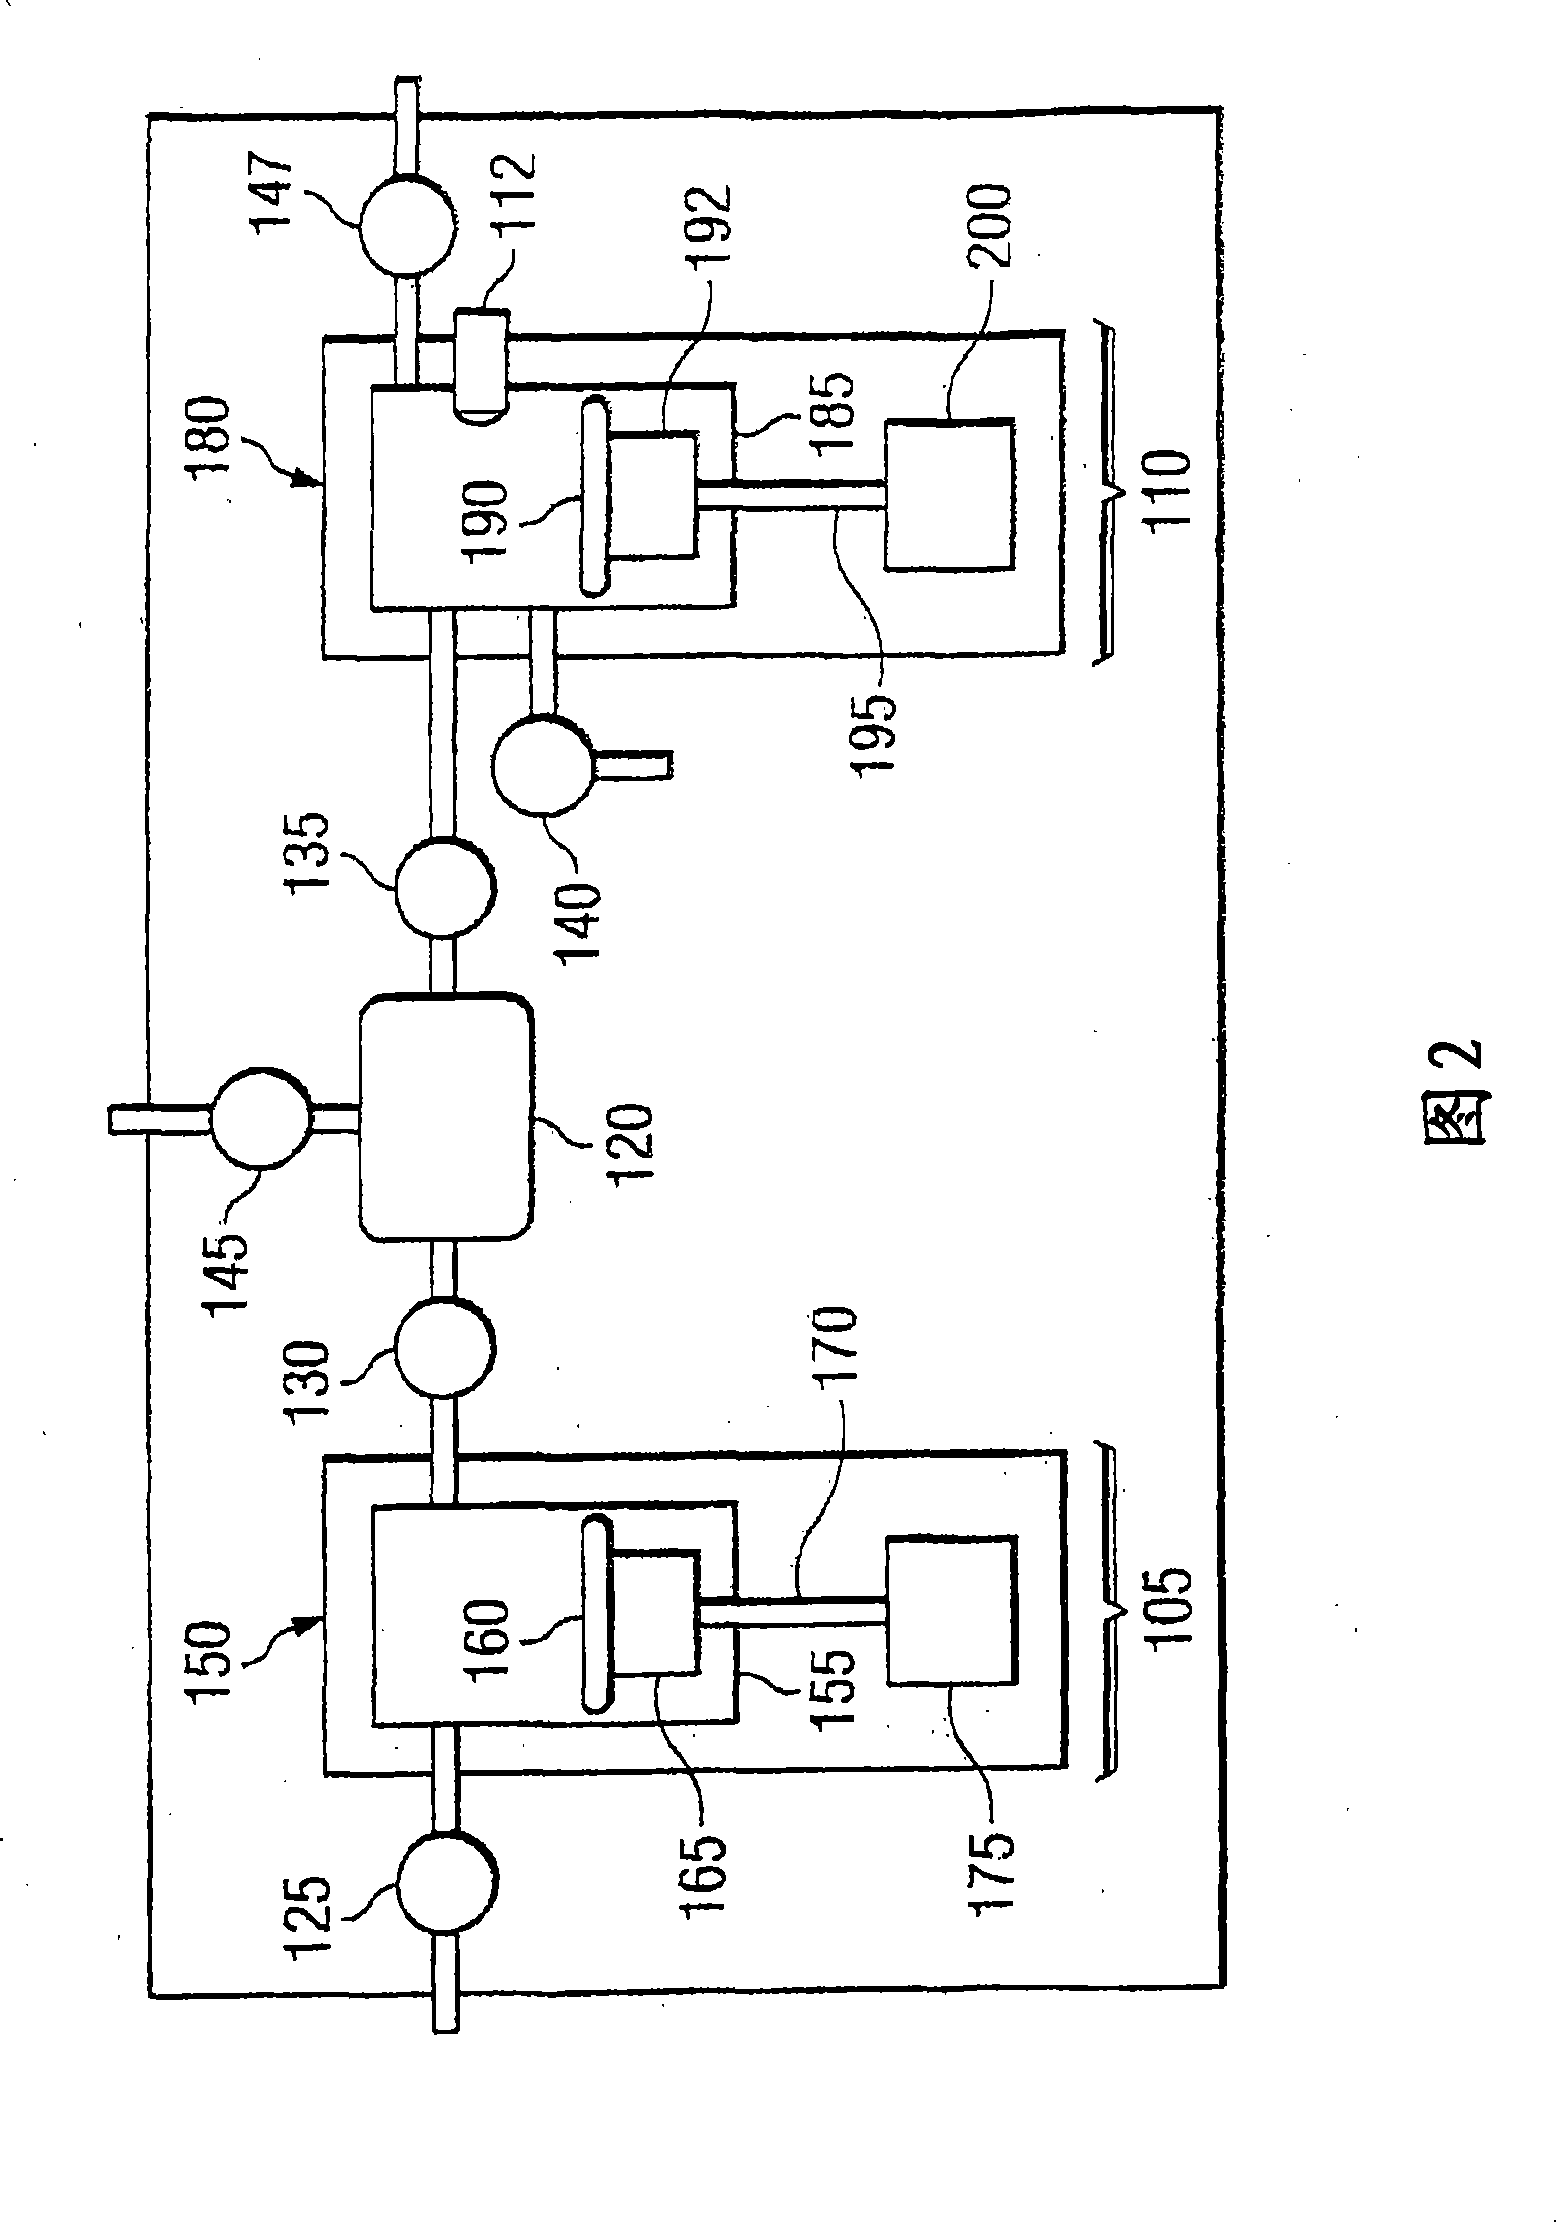 System for position control of a mechanical piston in a pump